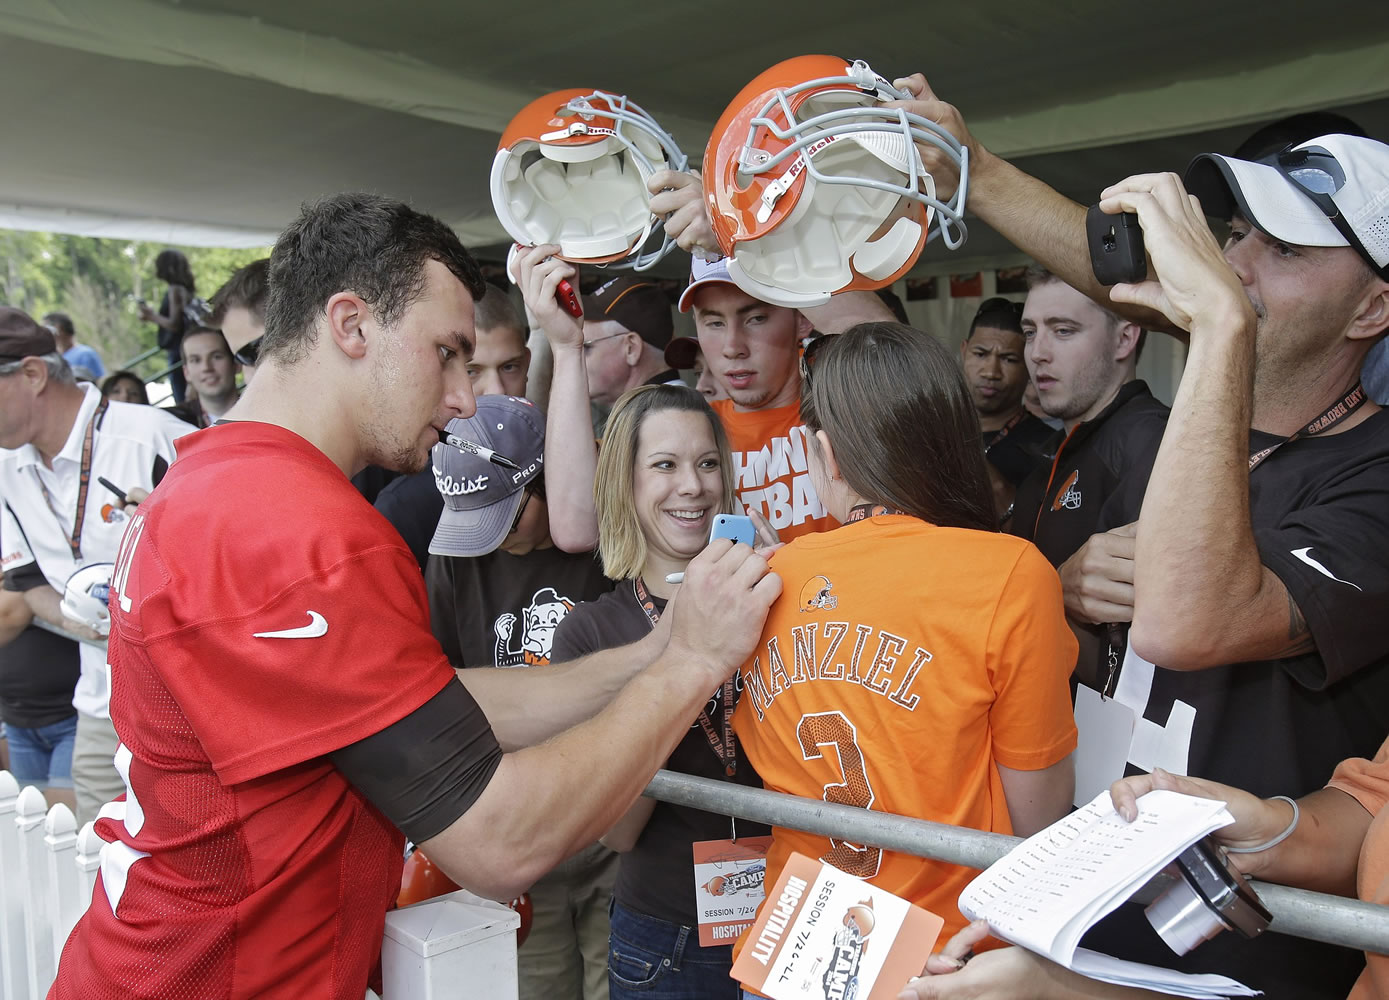 Cleveland Browns quarterback Johnny Manziel signs autographs for fans after his first practice at the NFL football team's training camp in Berea, Ohio on Saturday, July 26, 2014.